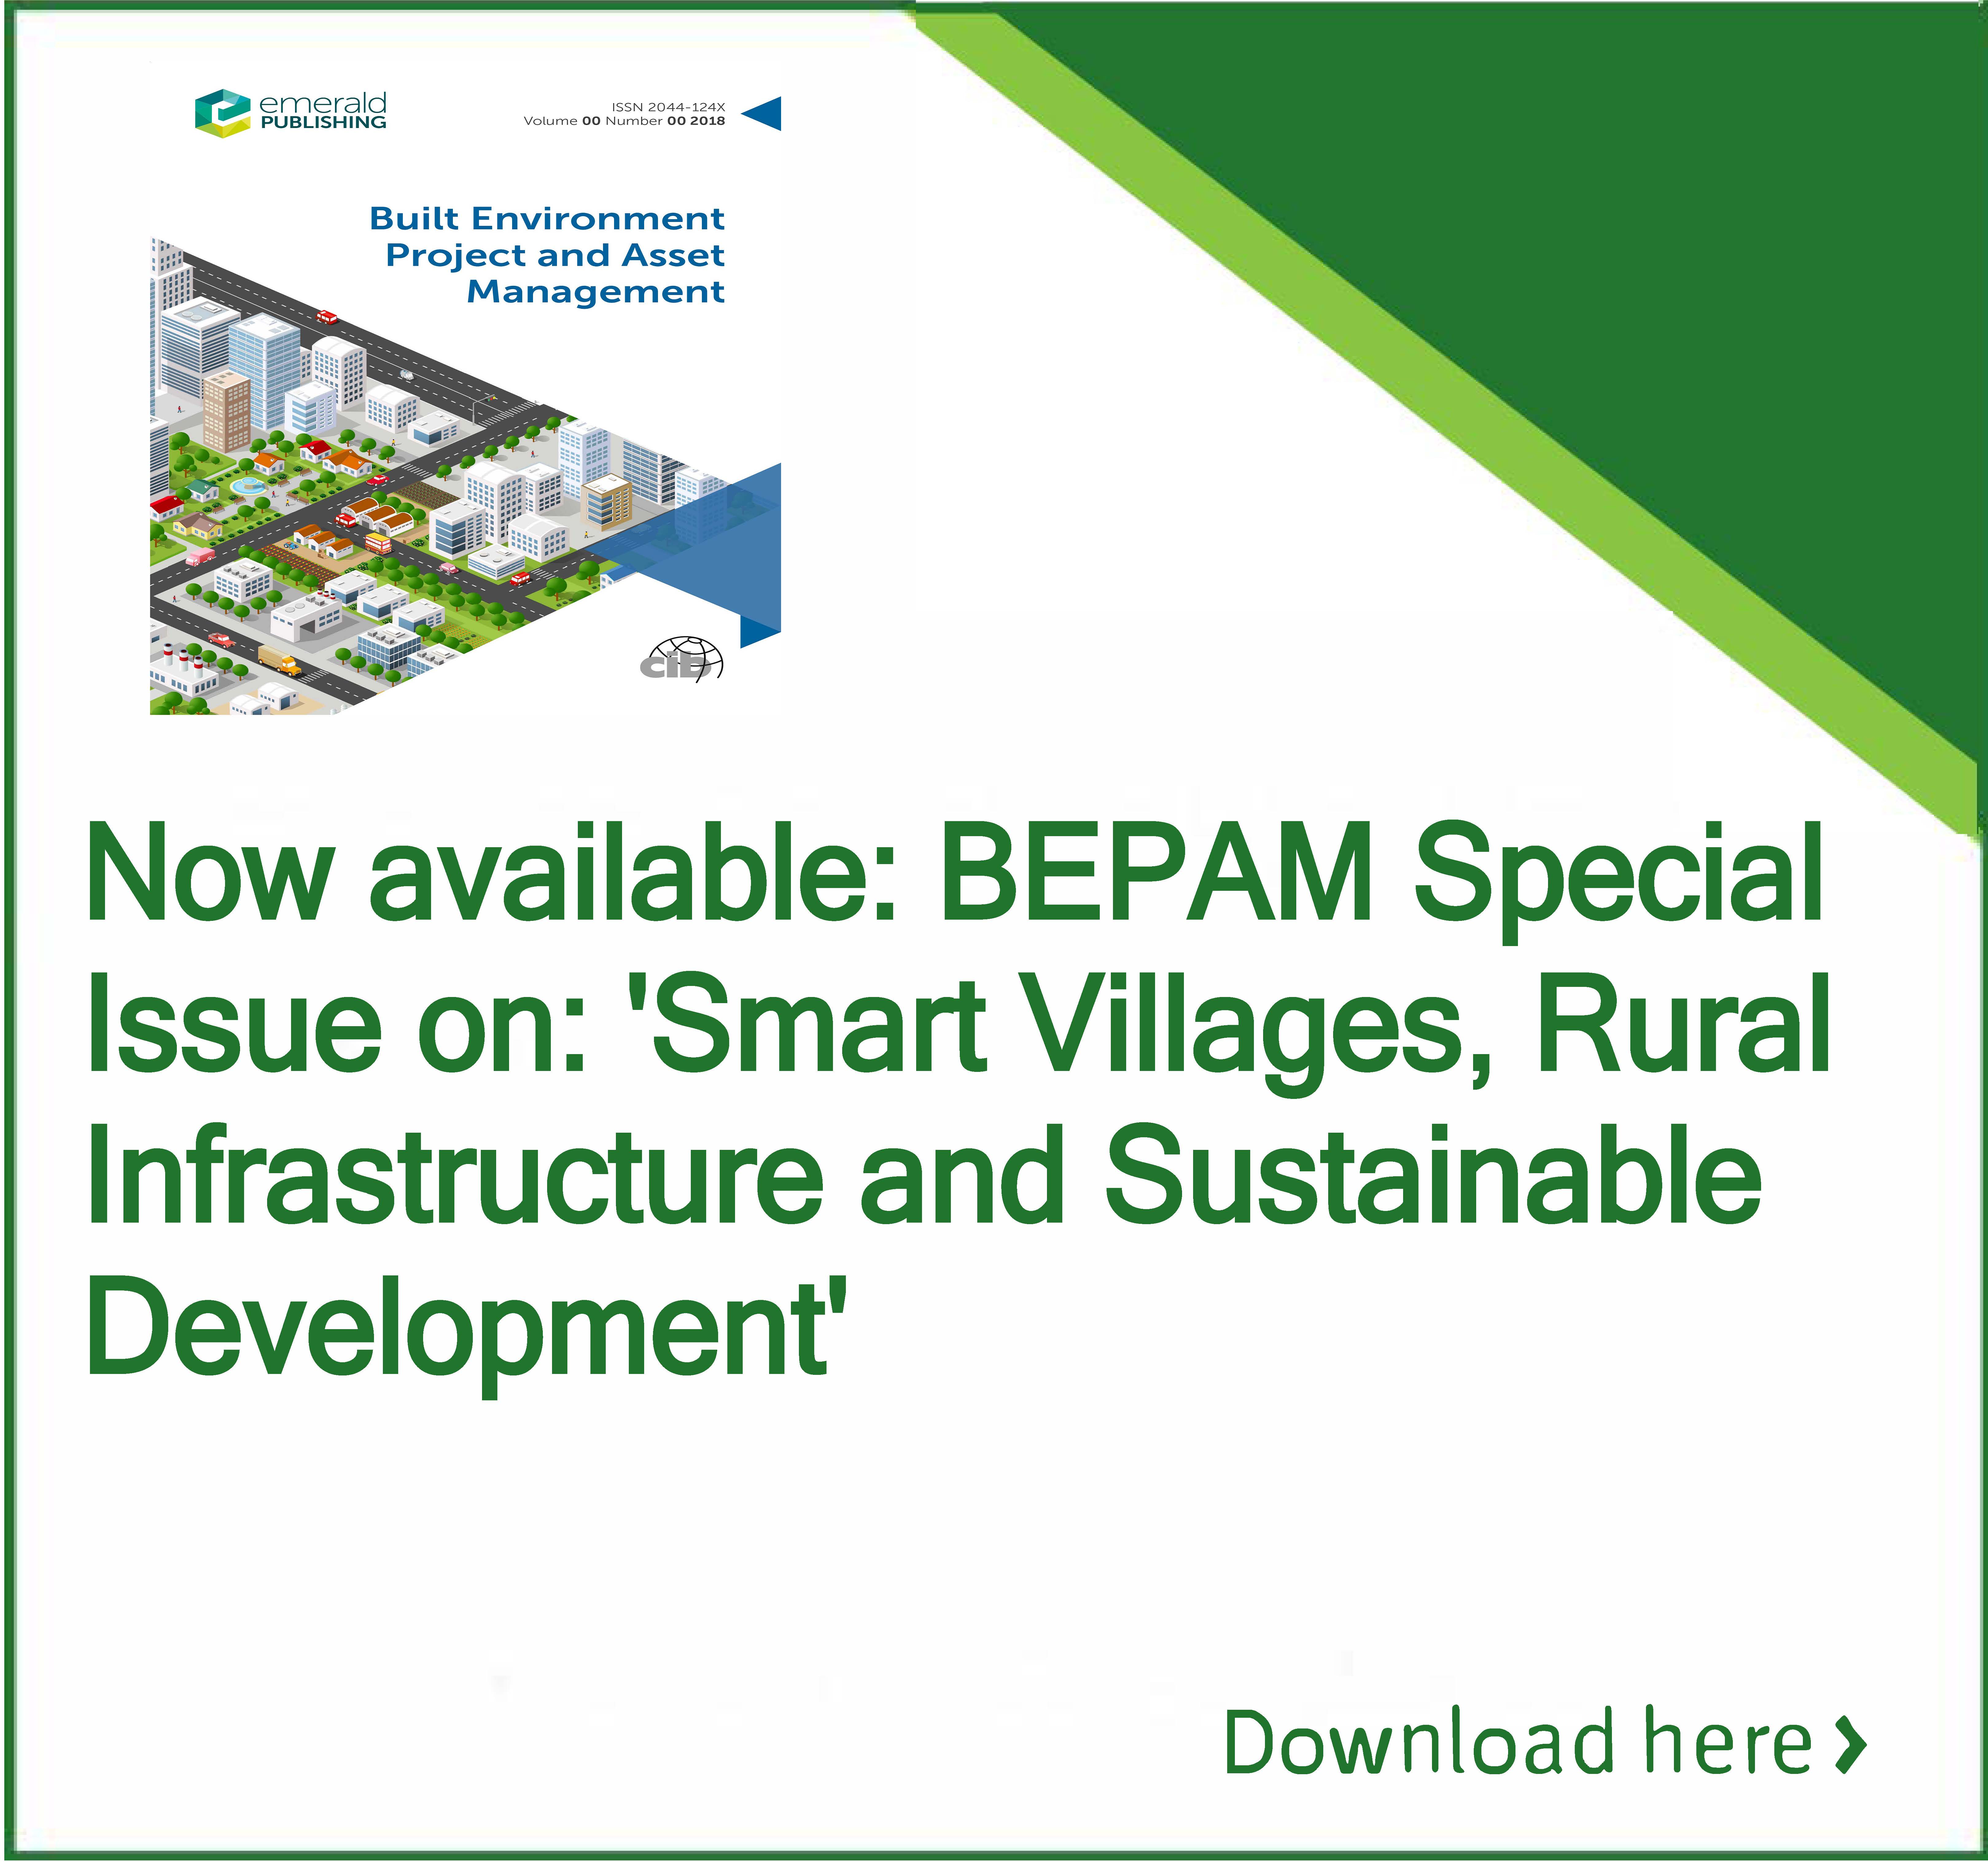 Now available: BEPAM Special Issue on: ‘Smart Villages, Rural Infrastructure and Sustainable Development’